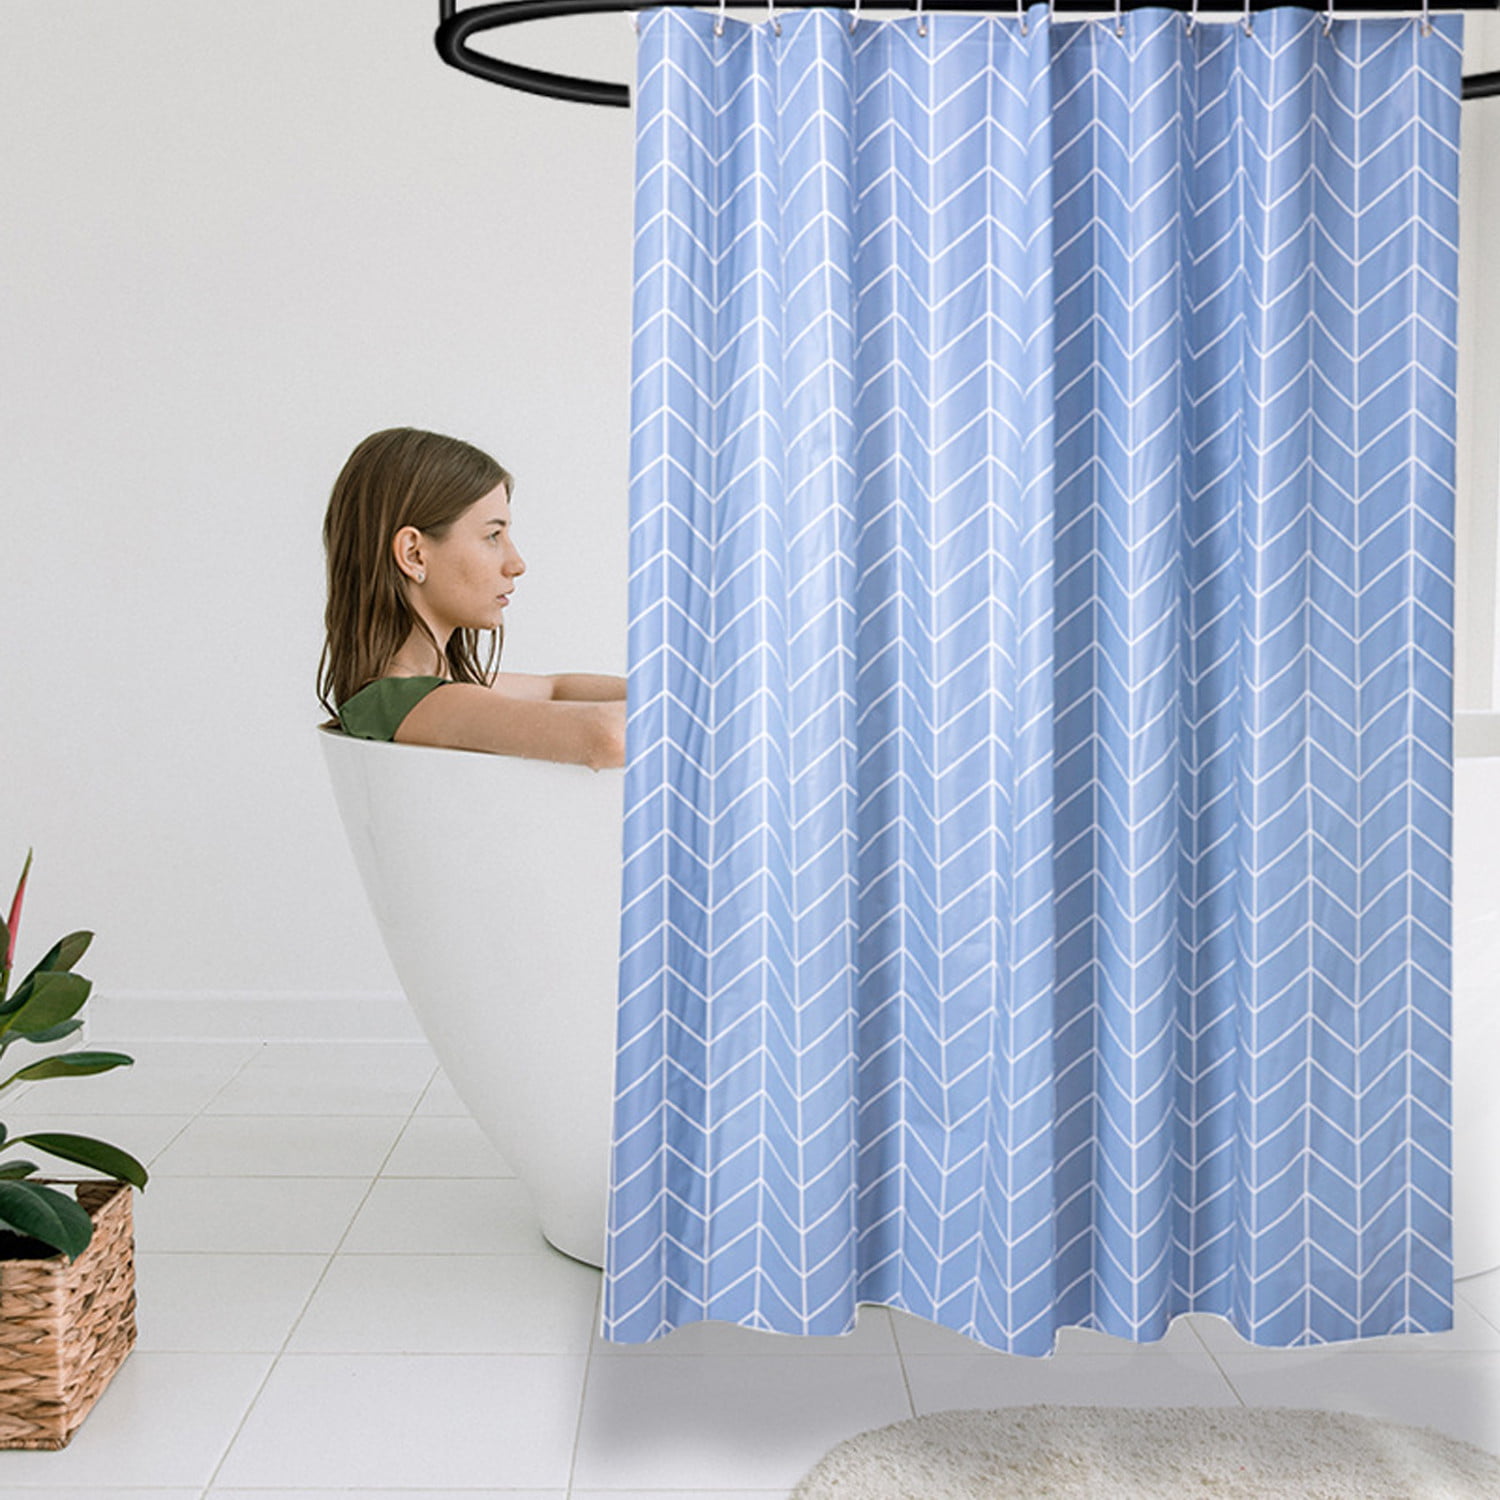 71 x 71 Inch Hankyky Shower Curtain Polyester Mould and Mildew Resistant Bathroom Curtain Liner Waterproof Hotel Quality With 12 Hooks 180 x 180 cm